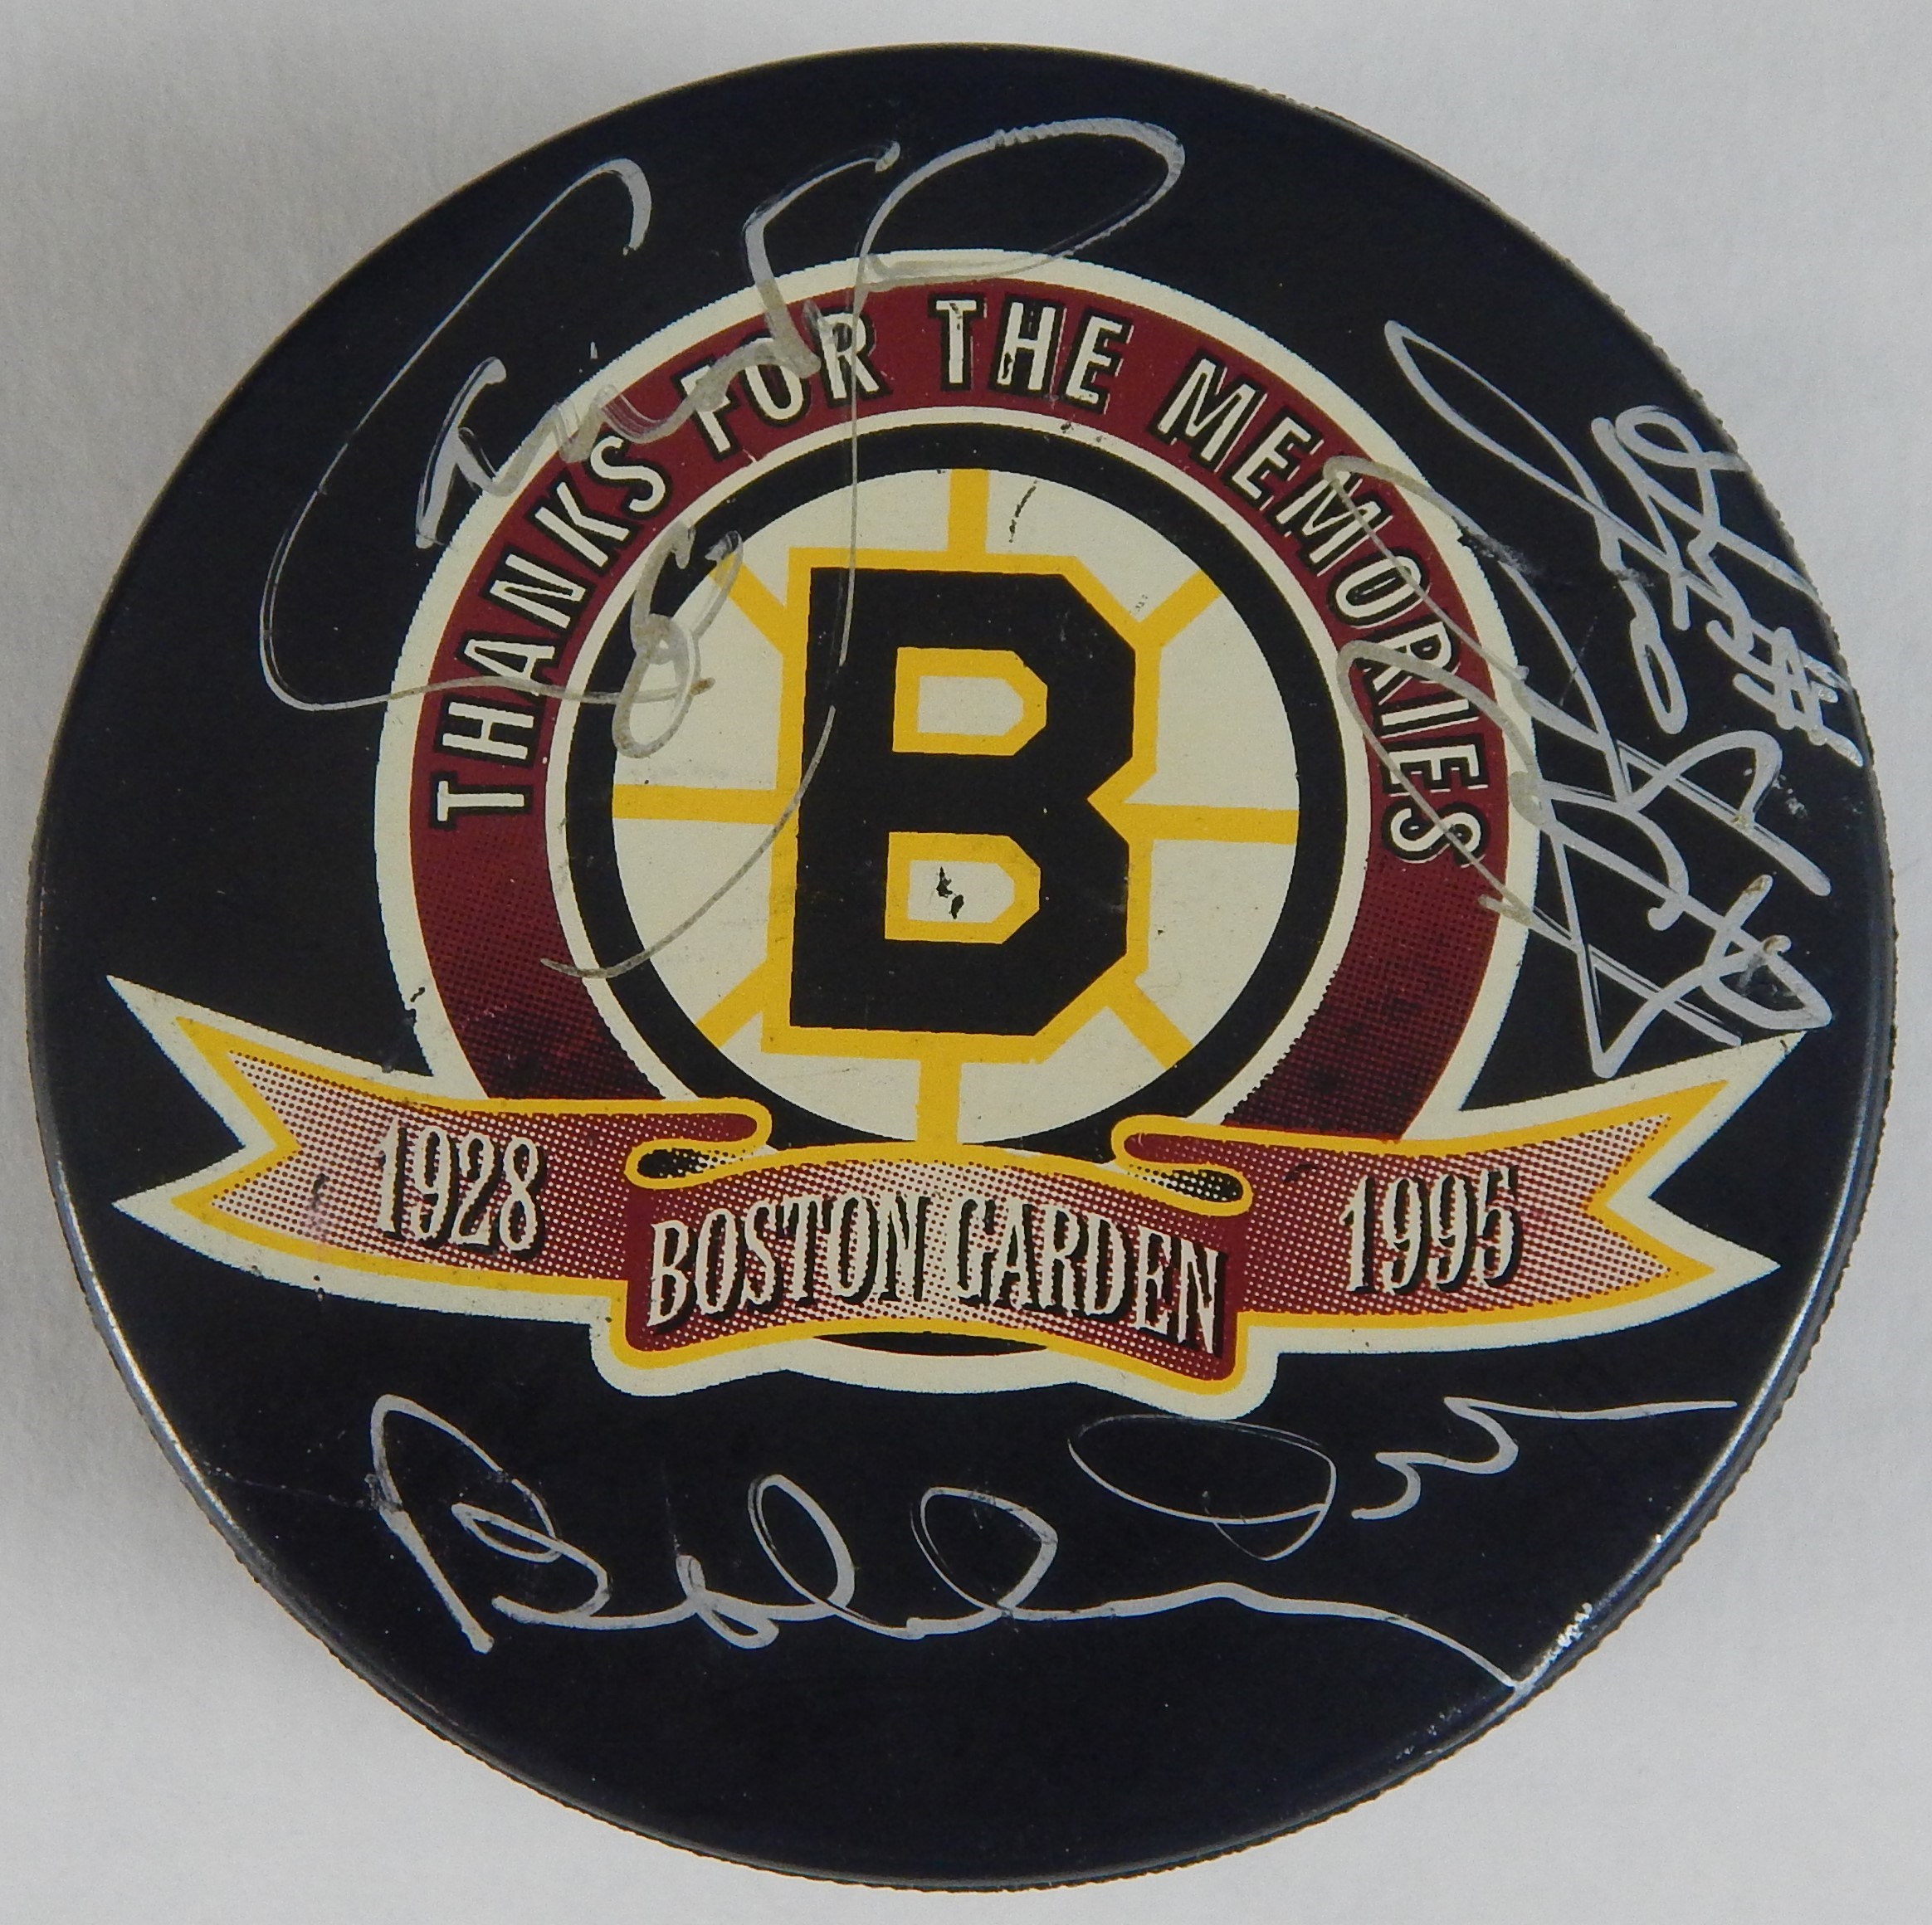 - Three Boston Bruins Legends Signed Puck (Orr, Bourque, Neely)